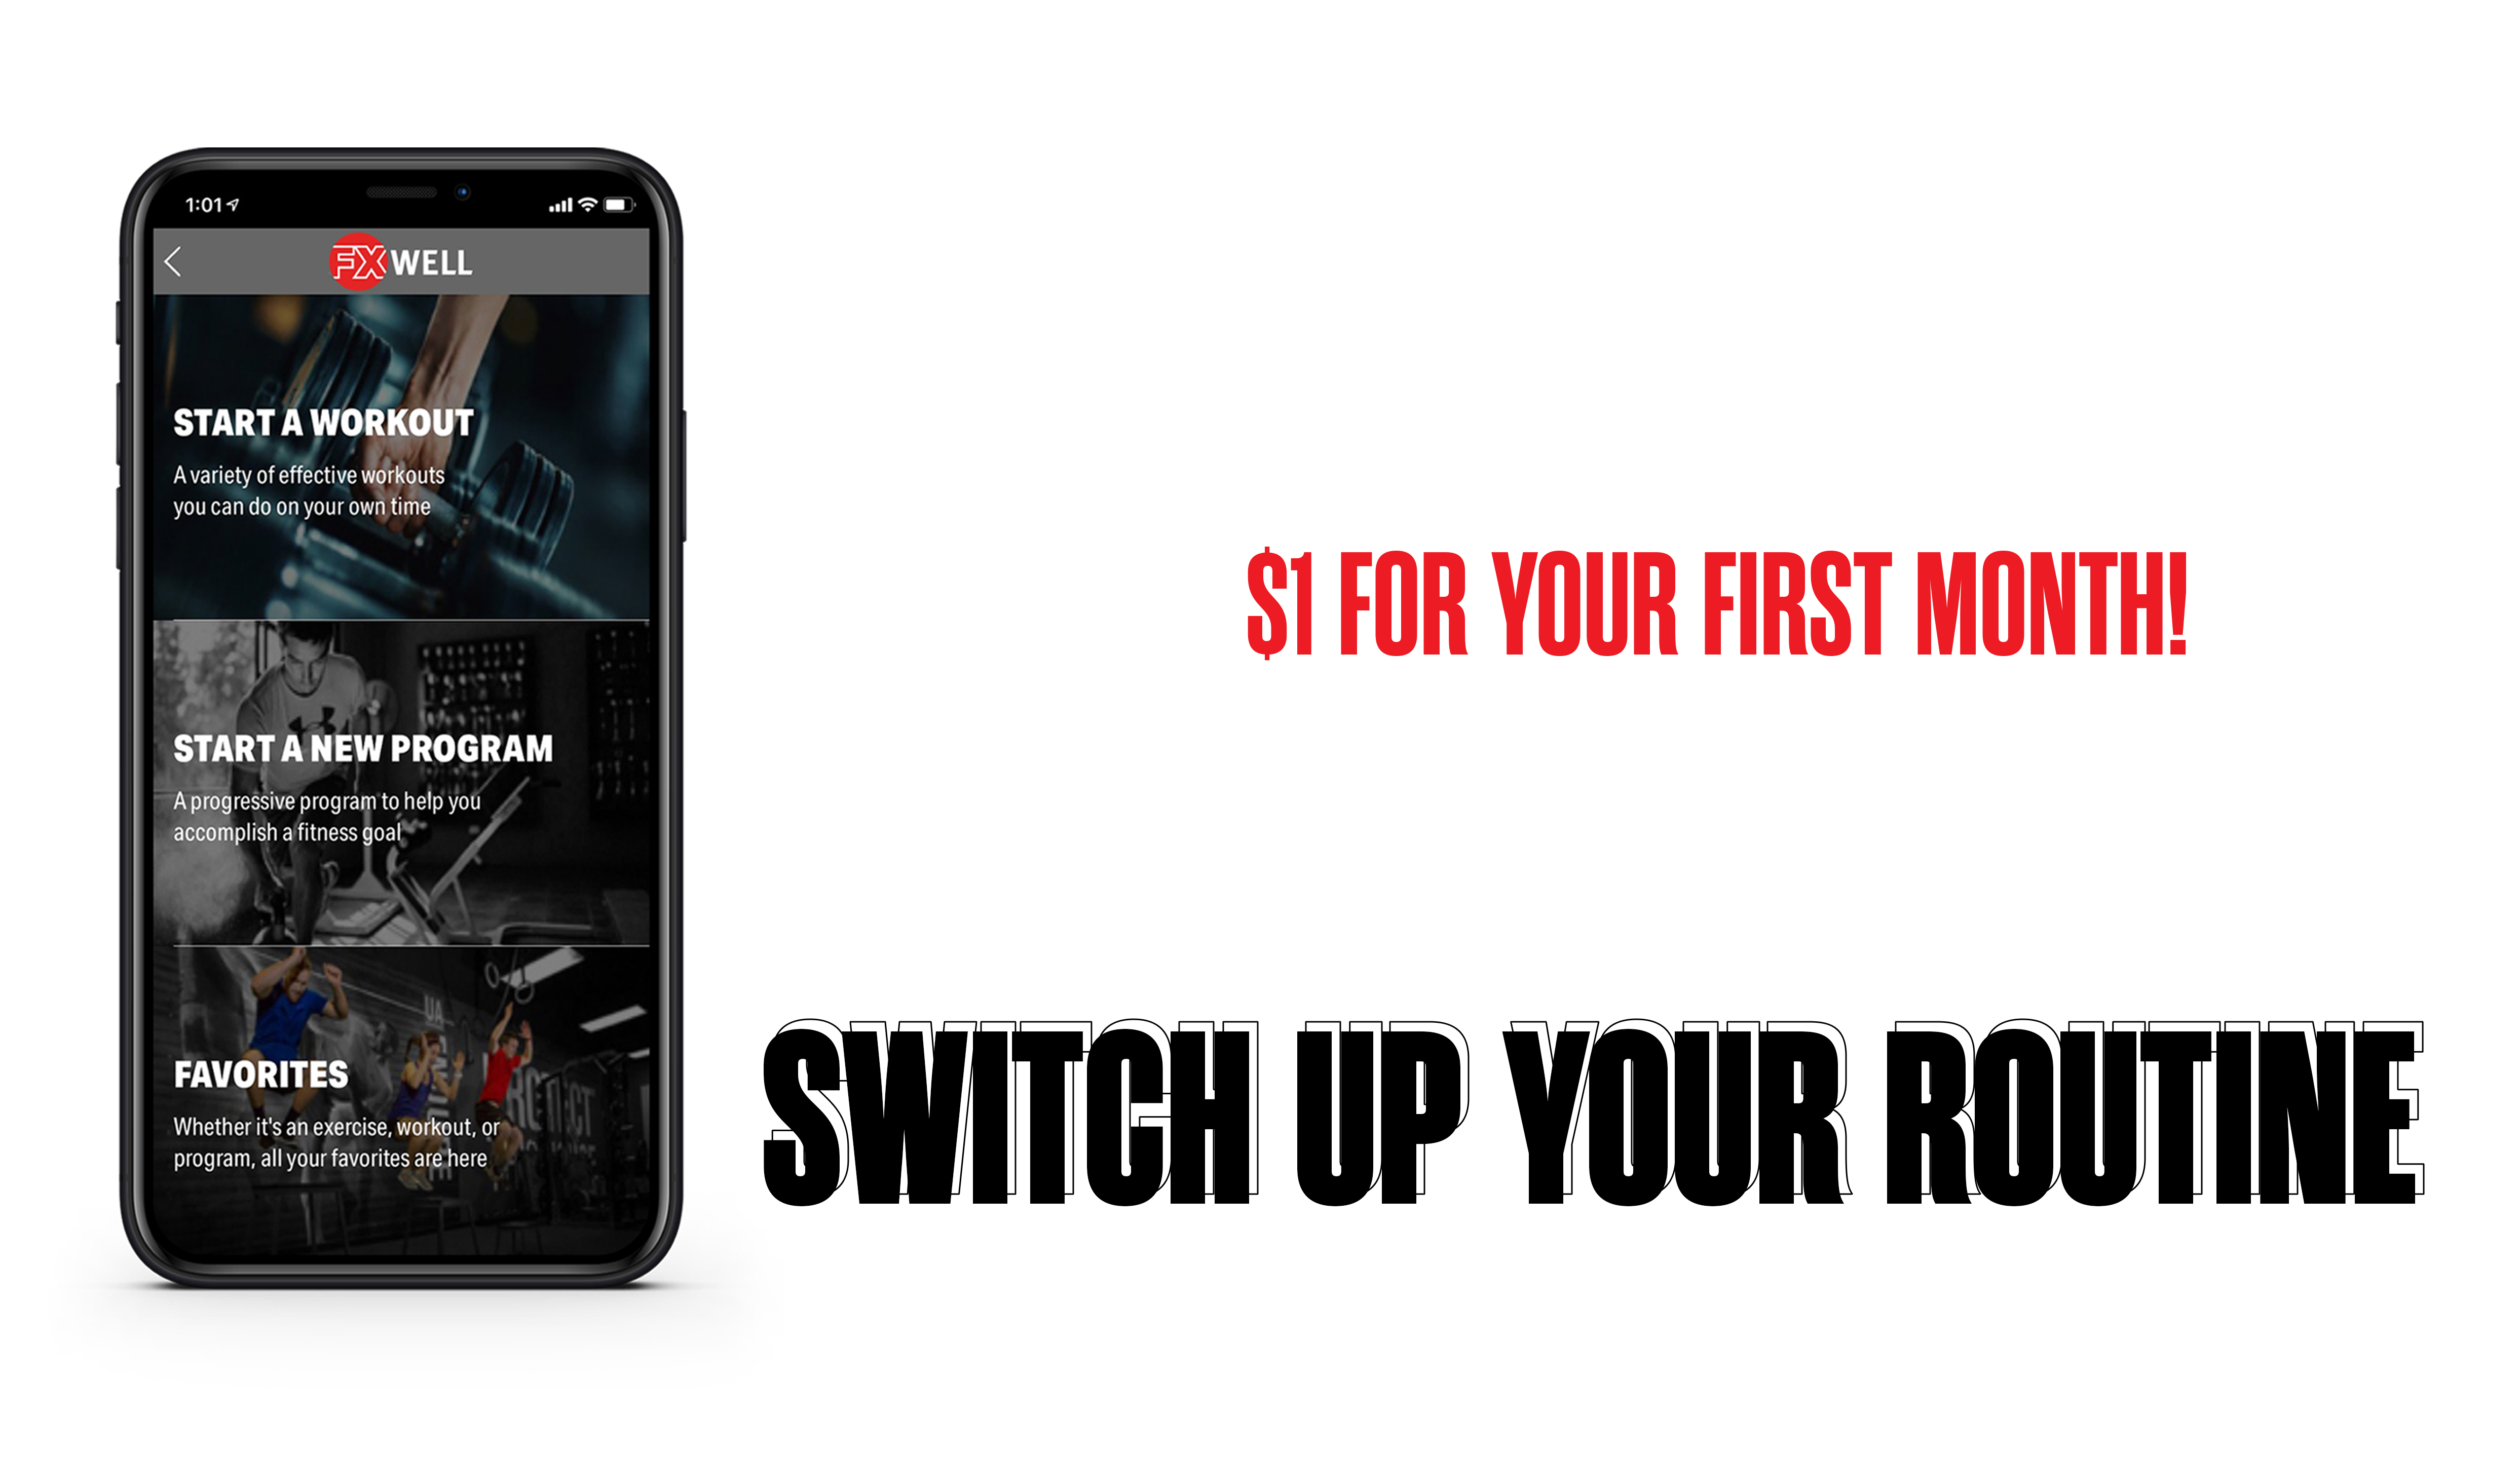 Image of Iphone with Digital Fitness app displayed and text that reads "Get access to a Personal Trainer in the pal of your hand, anywhere, at any time. $1 for your first month. Switch up your routine."